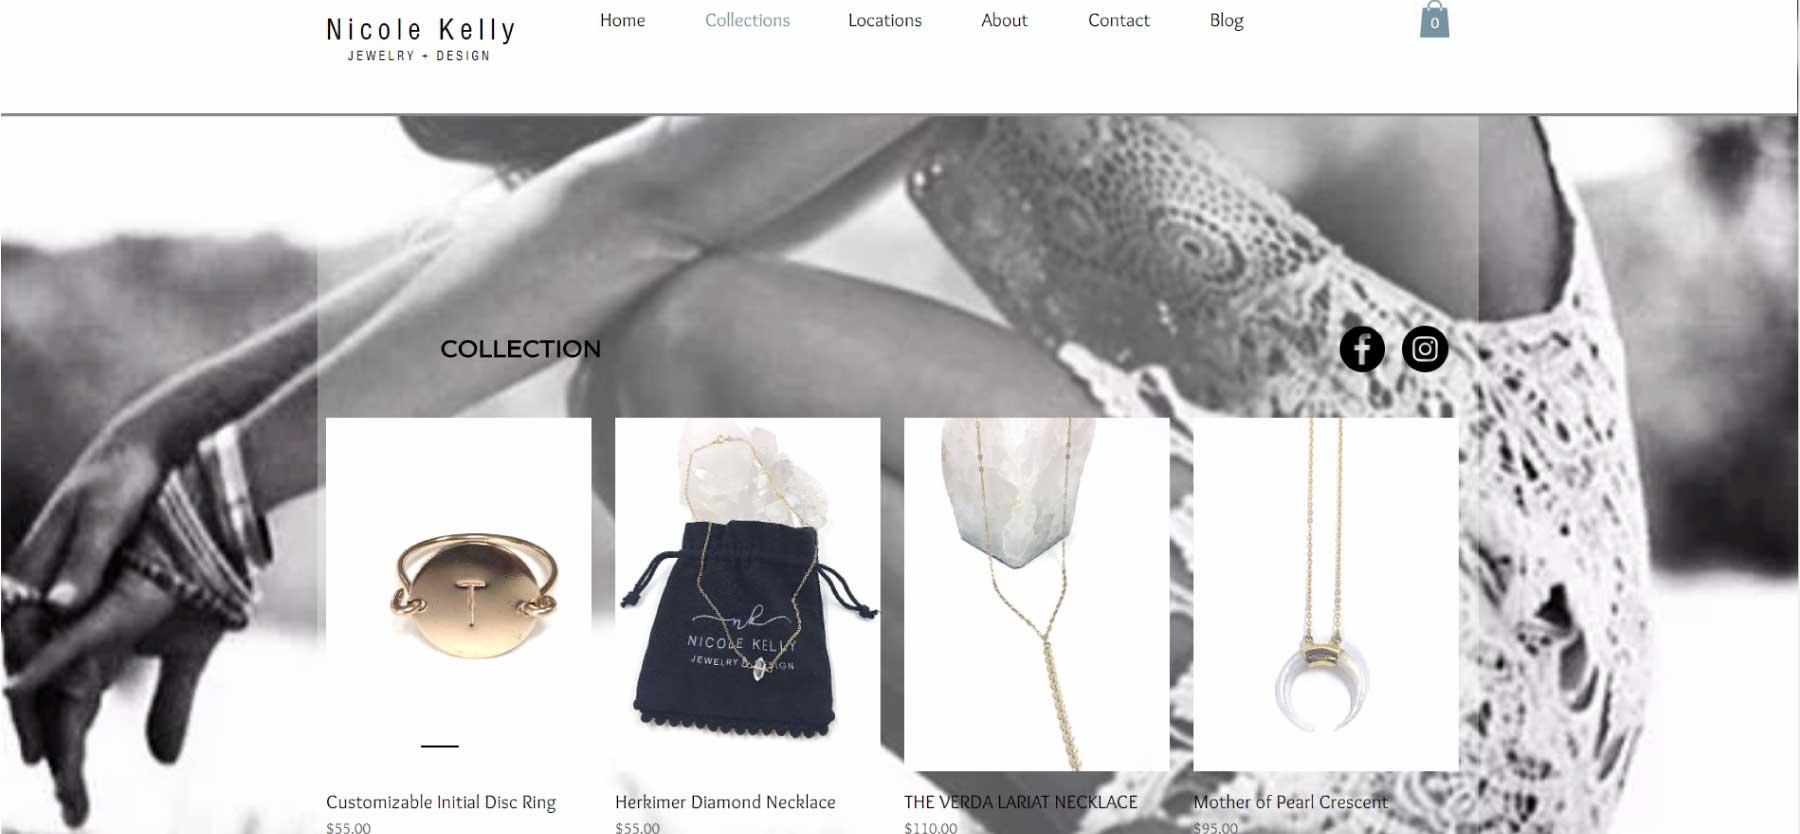 Example of Website Created by Lulu Bee Marketing and Design